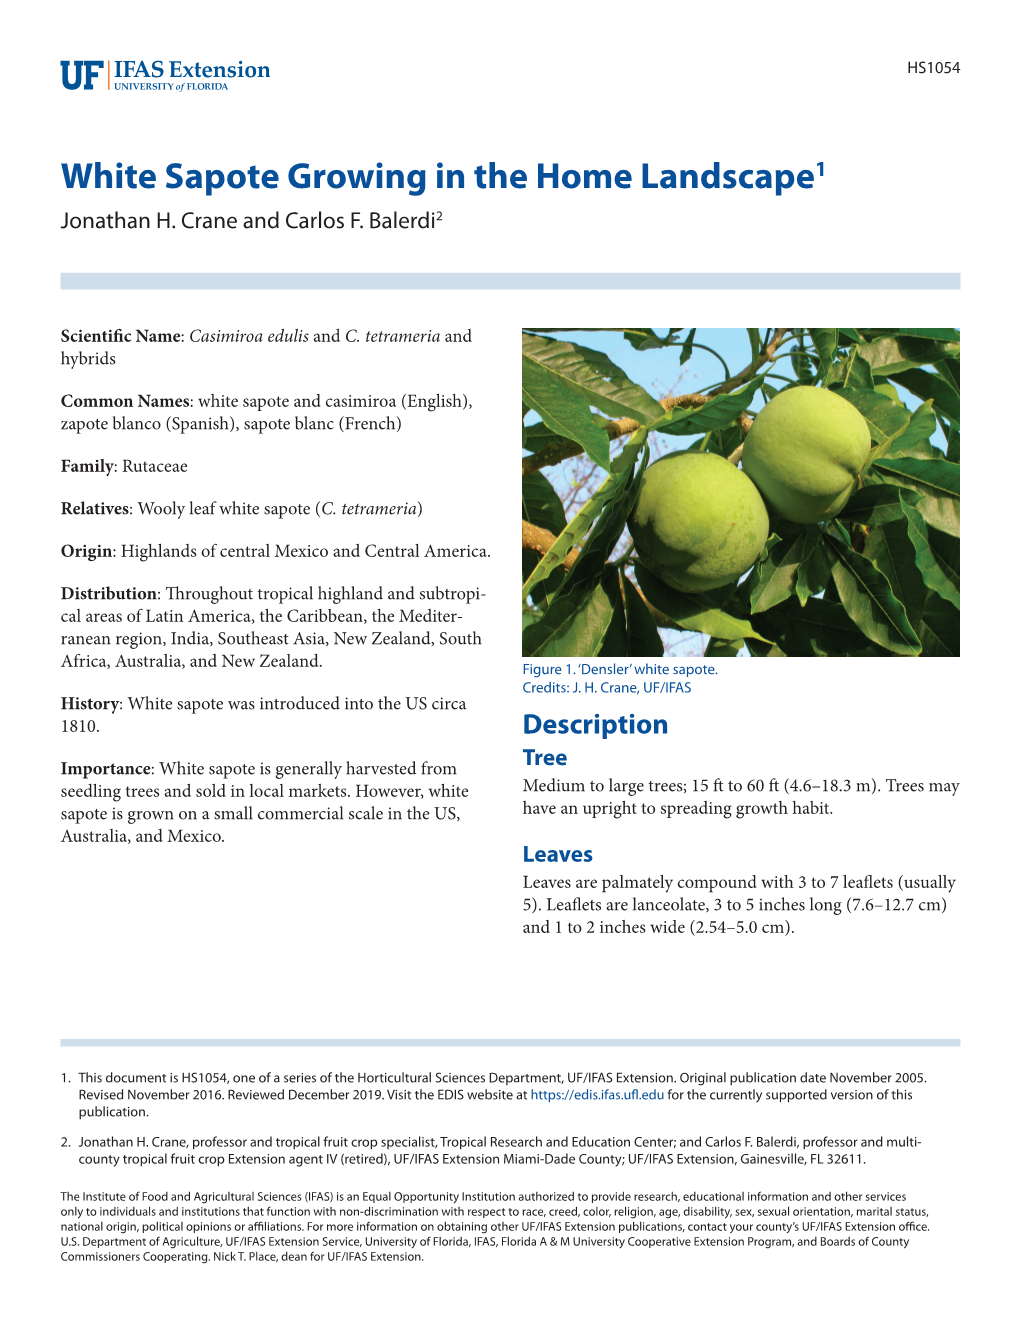 White Sapote Growing in the Home Landscape1 Jonathan H